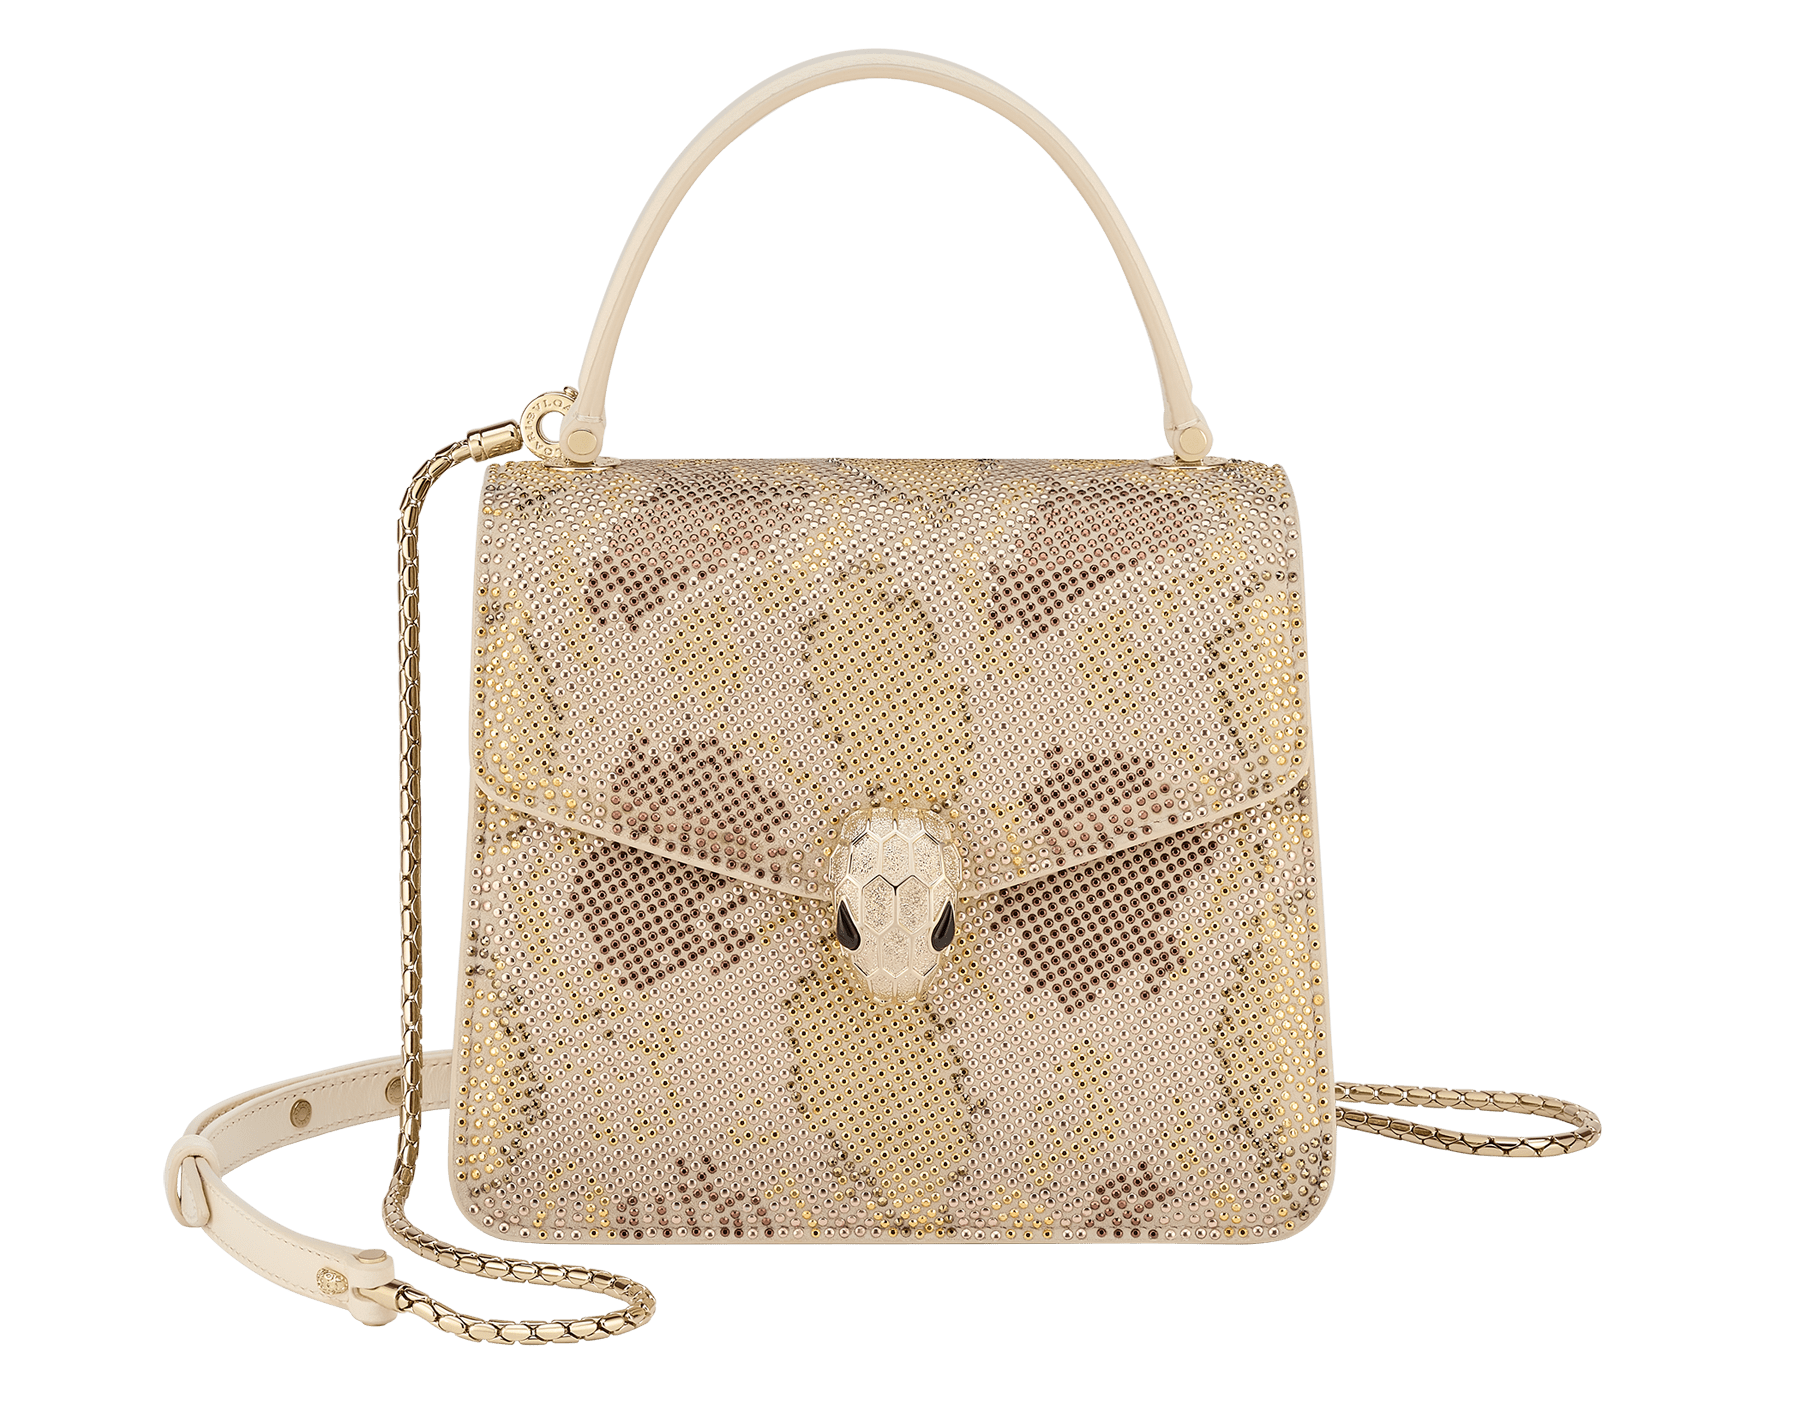 Serpenti Forever small top handle bag in natural suede with different-size crystals in various shades of gold, and black nappa leather lining. Captivating magnetic snakehead closure in light gold-plated brass embellished with "diamantatura" engraving on the scales and black onyx eyes. 292878 image 1